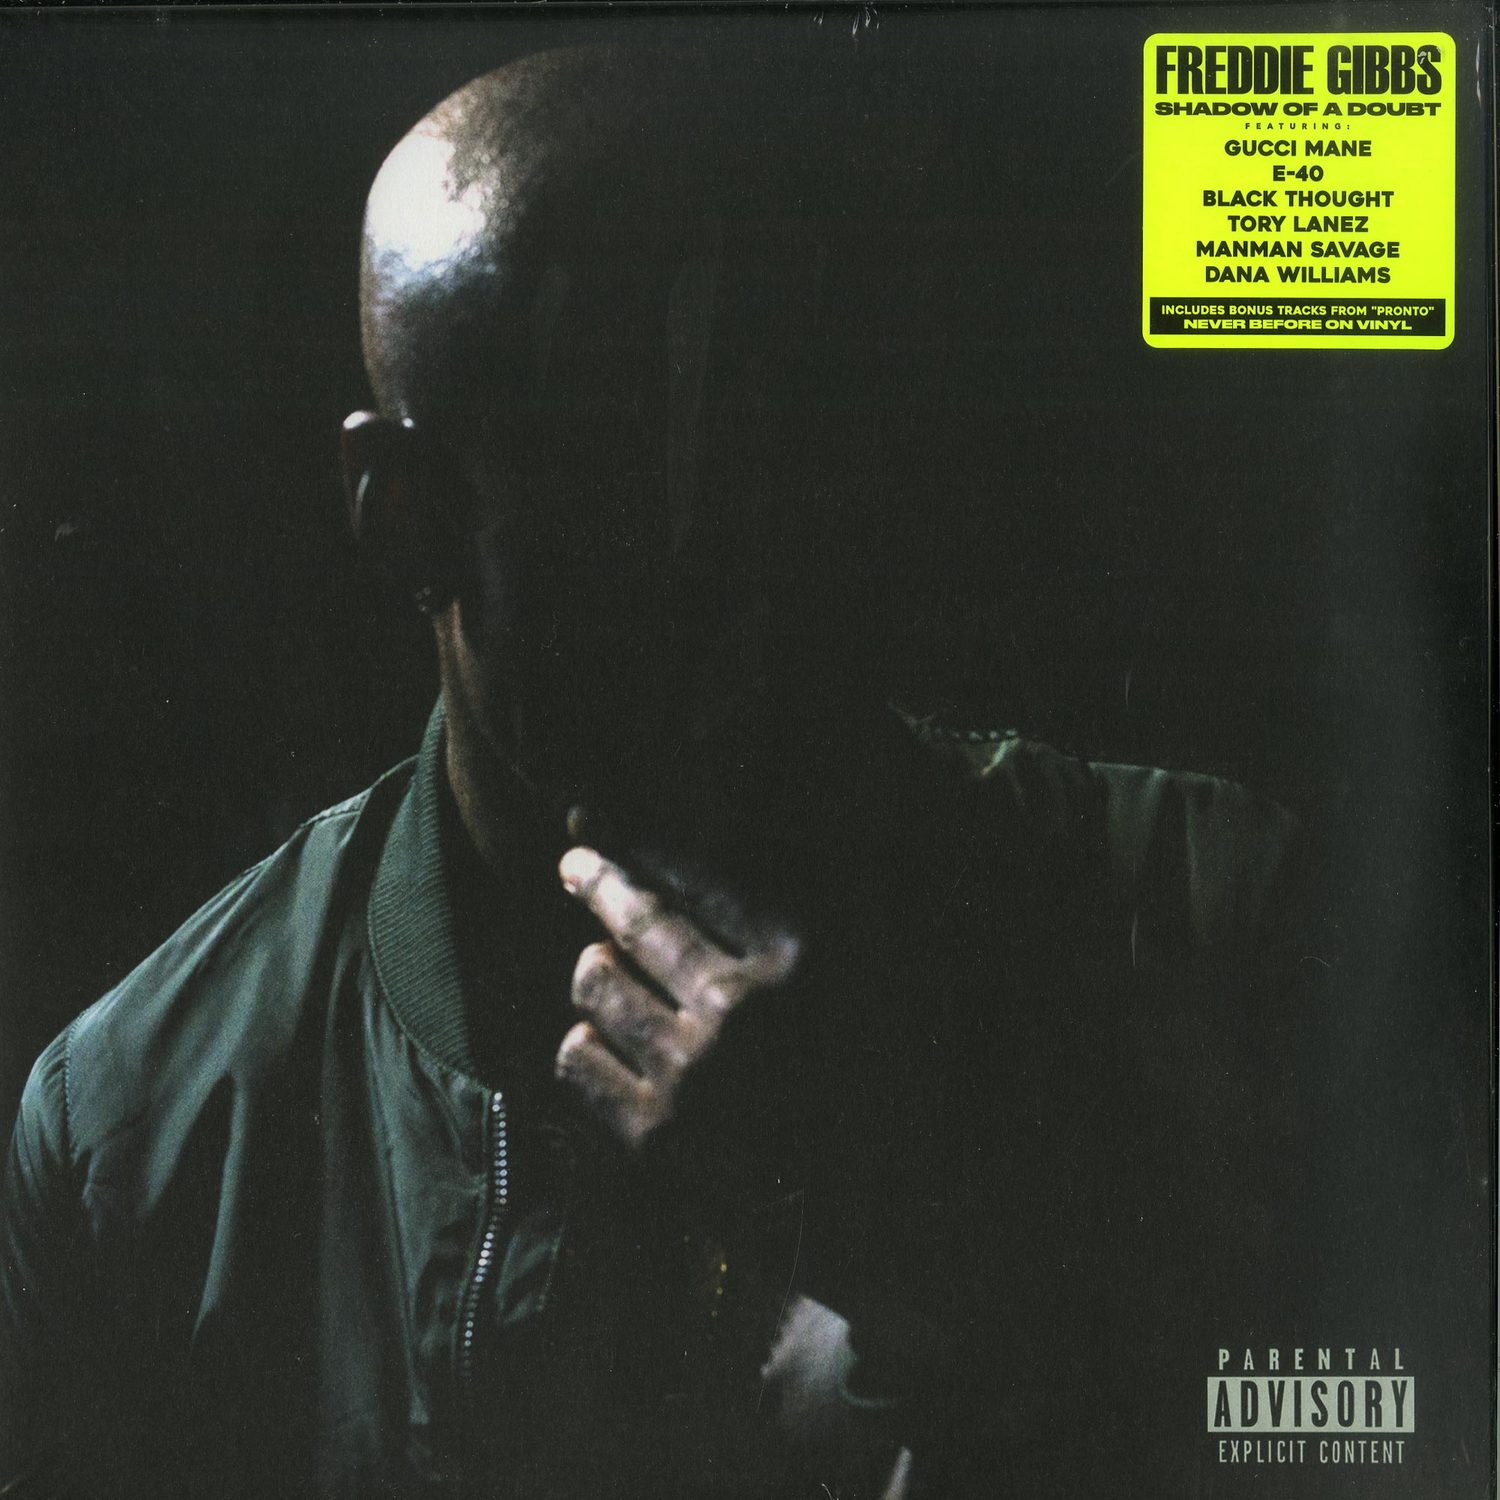 Freddie Gibbs - SHADOW OF A DOUBT 